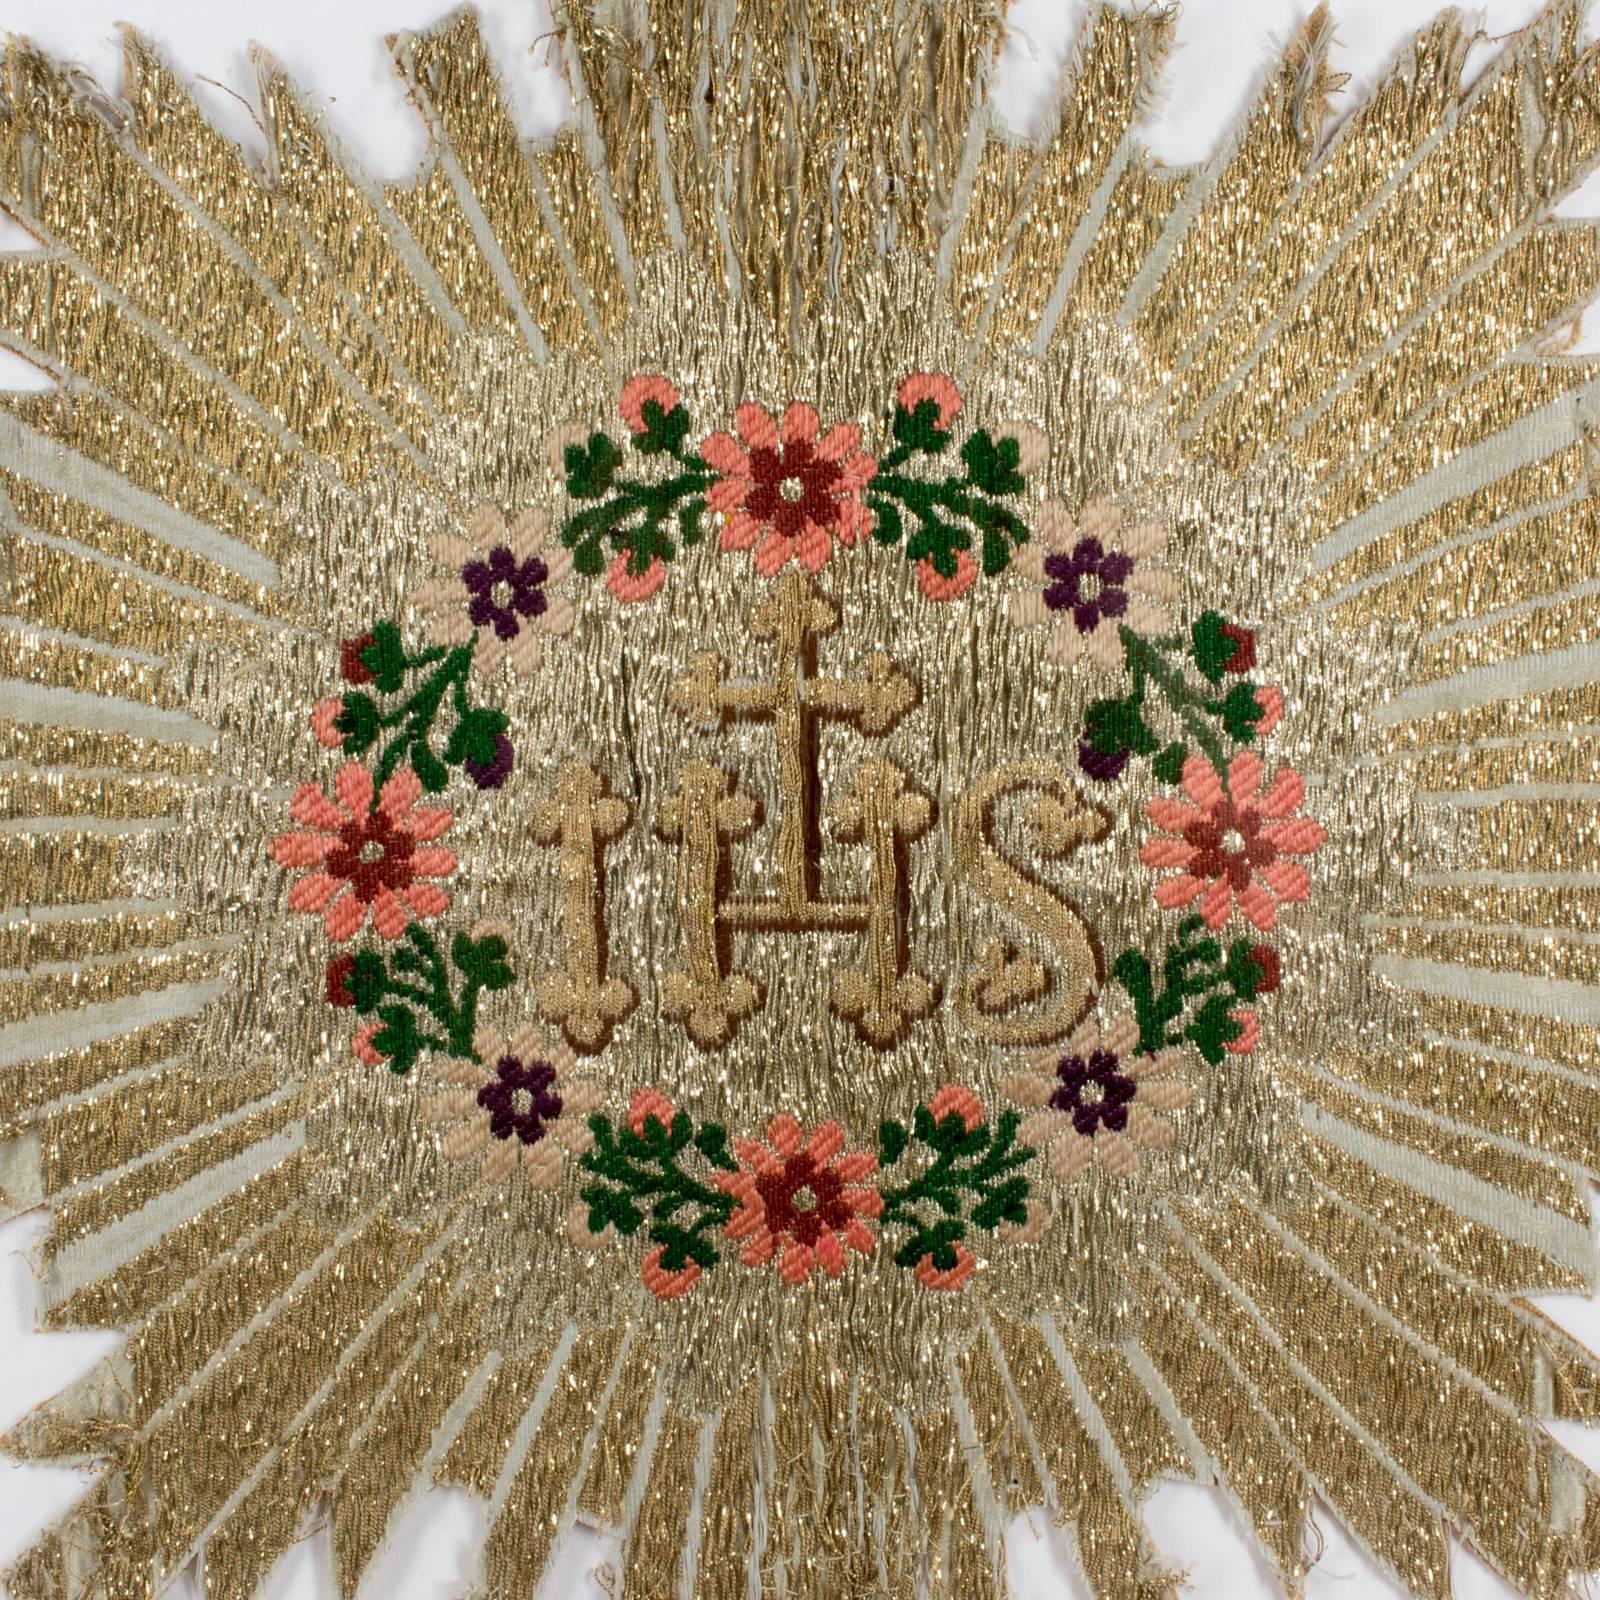 This beautifully made antique (late 1800s) textile fragment shows a metallic starburst shape with colorful embroidery at the centre, including flowers and the letters IHS, commonly known as a Christogram, which represents Christ. This piece was